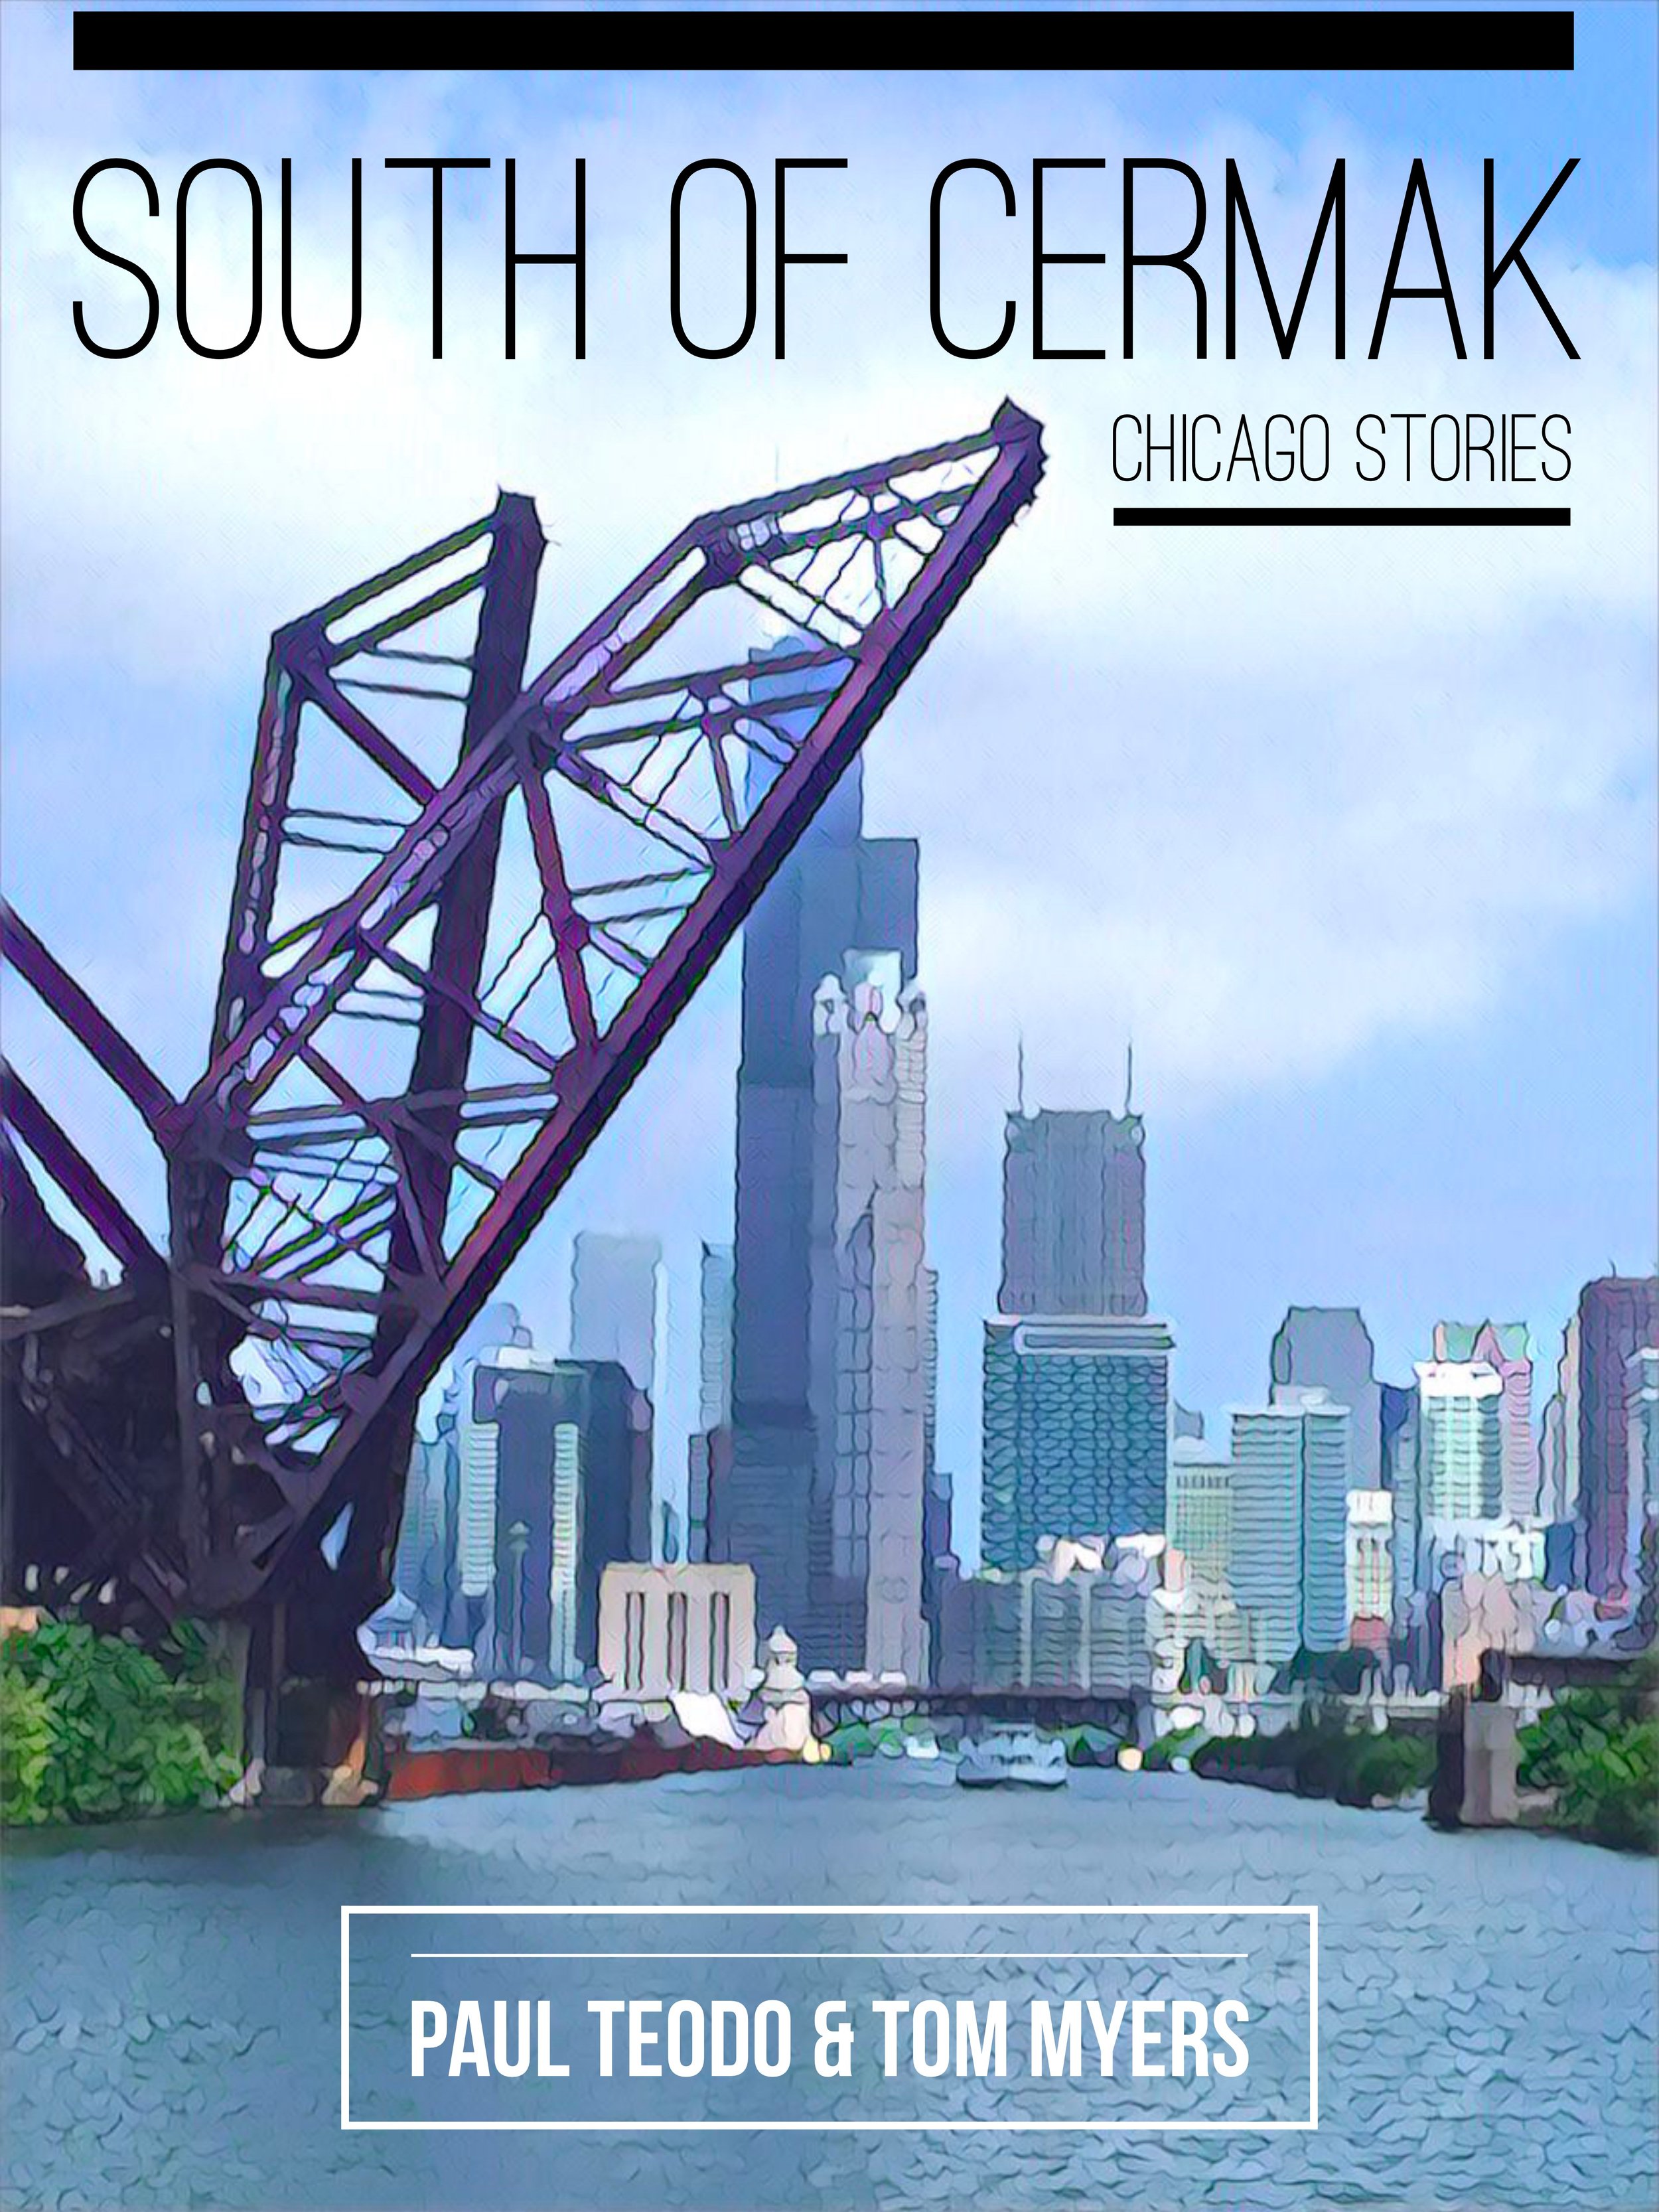 South of Cermak: Chicago Stories